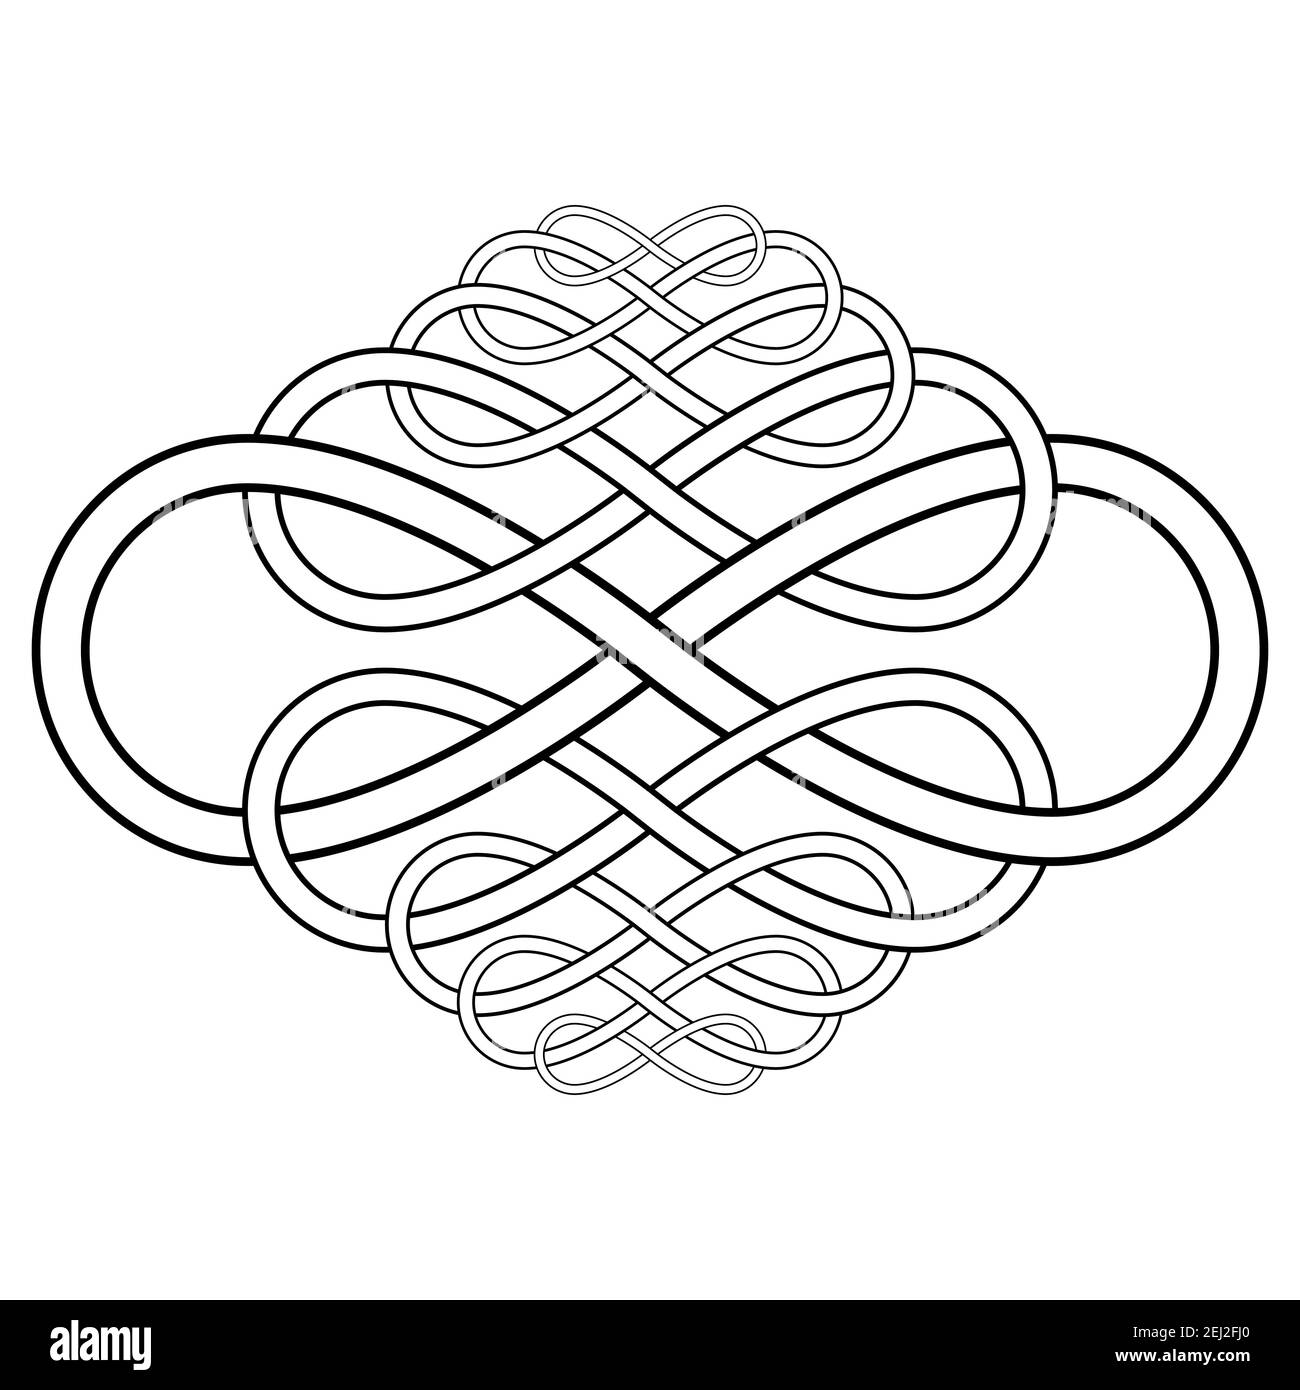 Calligraphy knot pattern from the infinity symbol vector calligraphy knot infinity sign Stock Vector